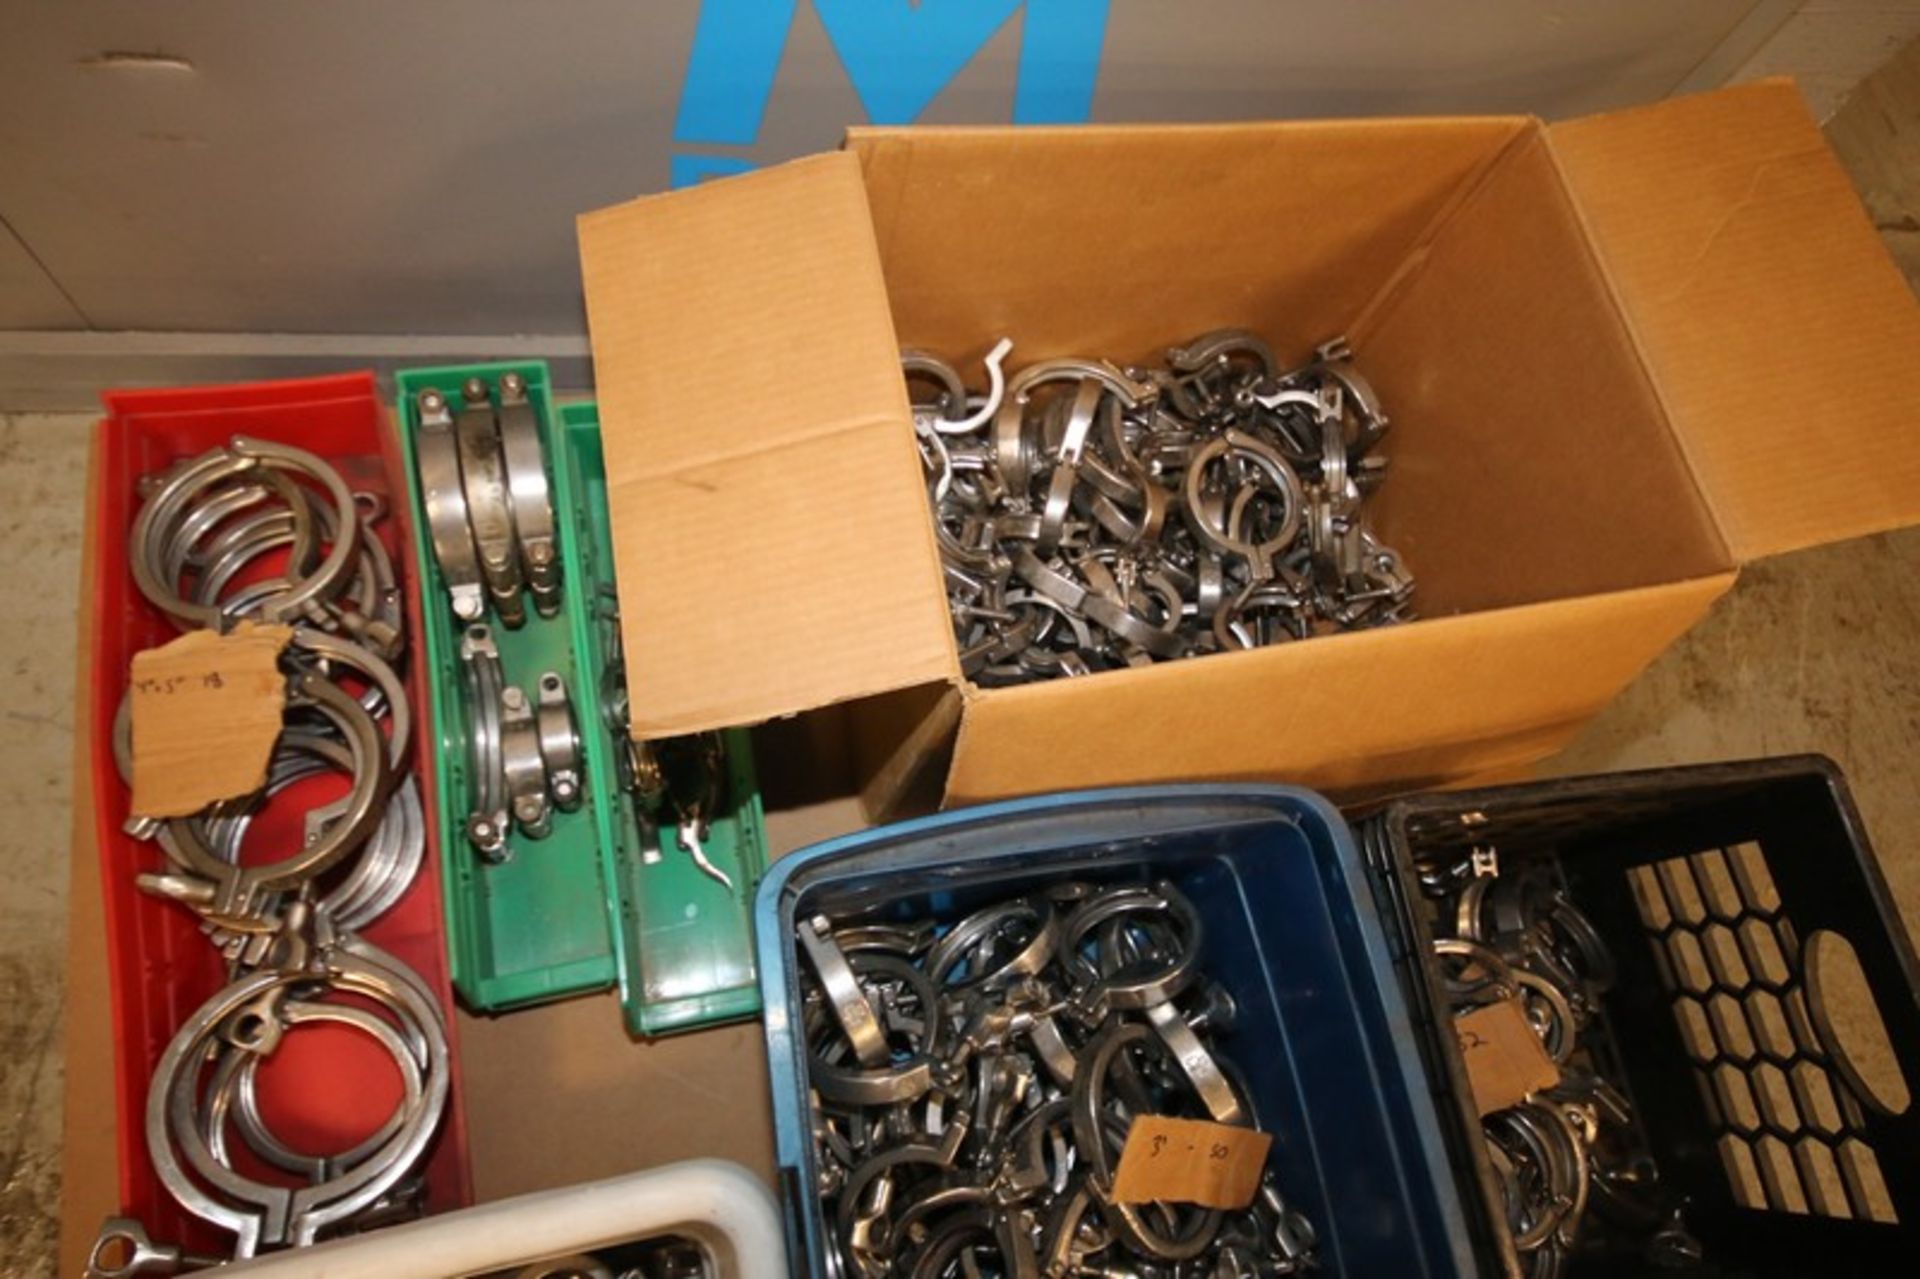 Aprox. 300 - 1", 1.5", 2.5", 3" & 4" Assorted S/S Clamps, Includes a Box Broke or Missing Parts - Image 3 of 3